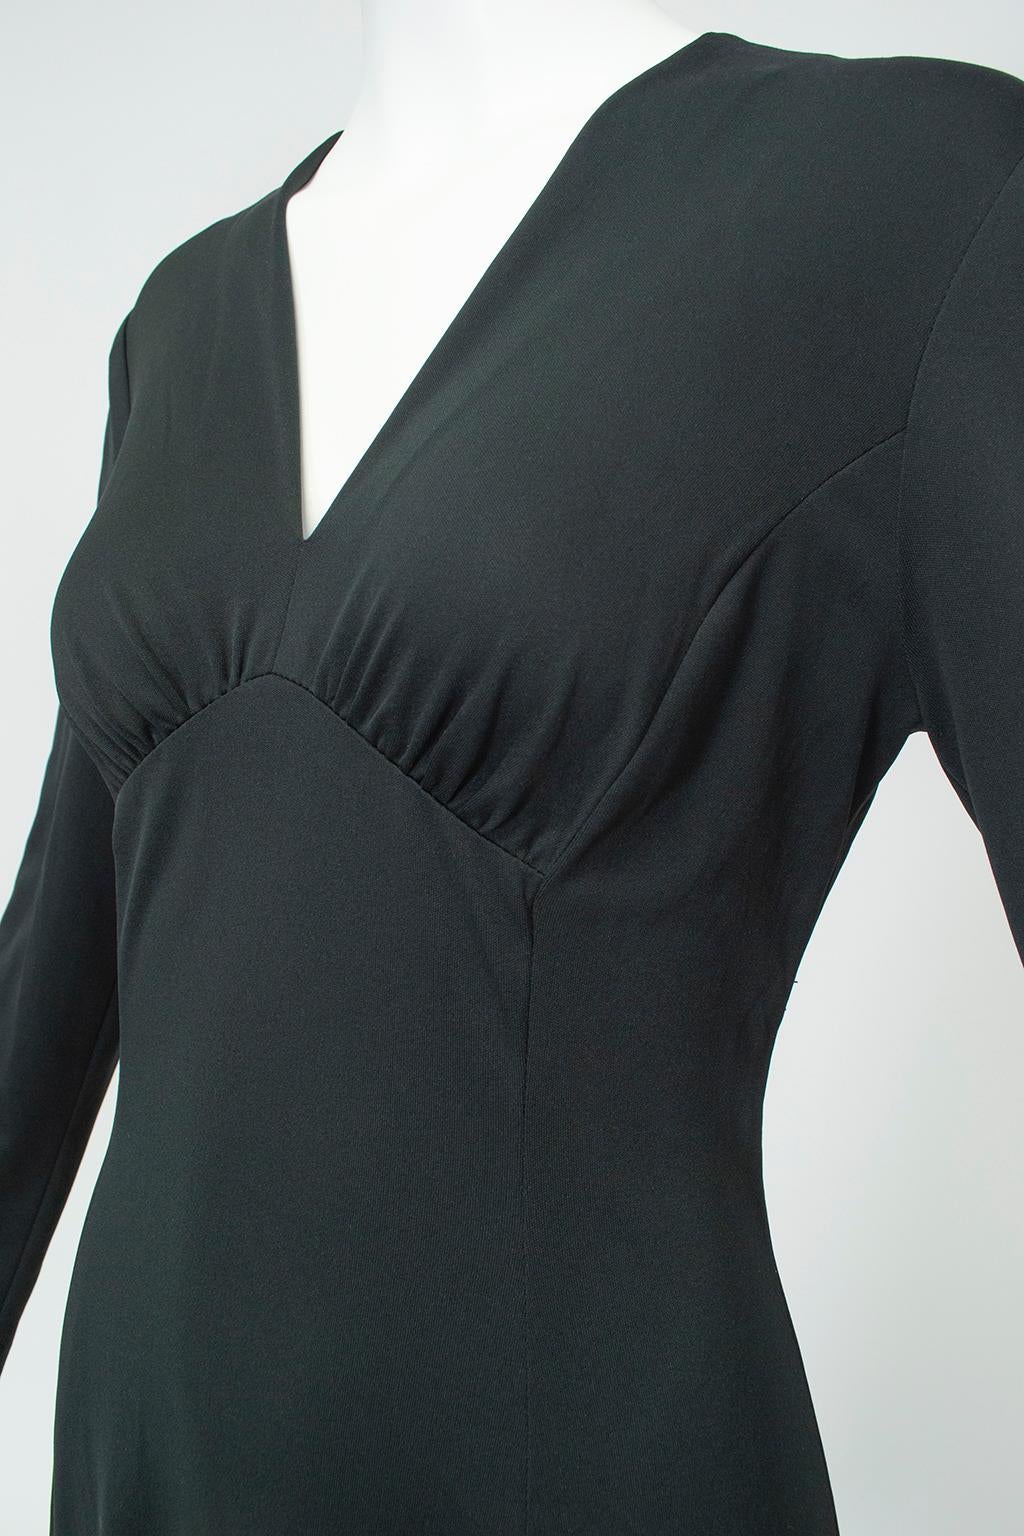 Swirling Black Jersey Disco Day Dress with Plunging Bodice – M, 1960s For Sale 1